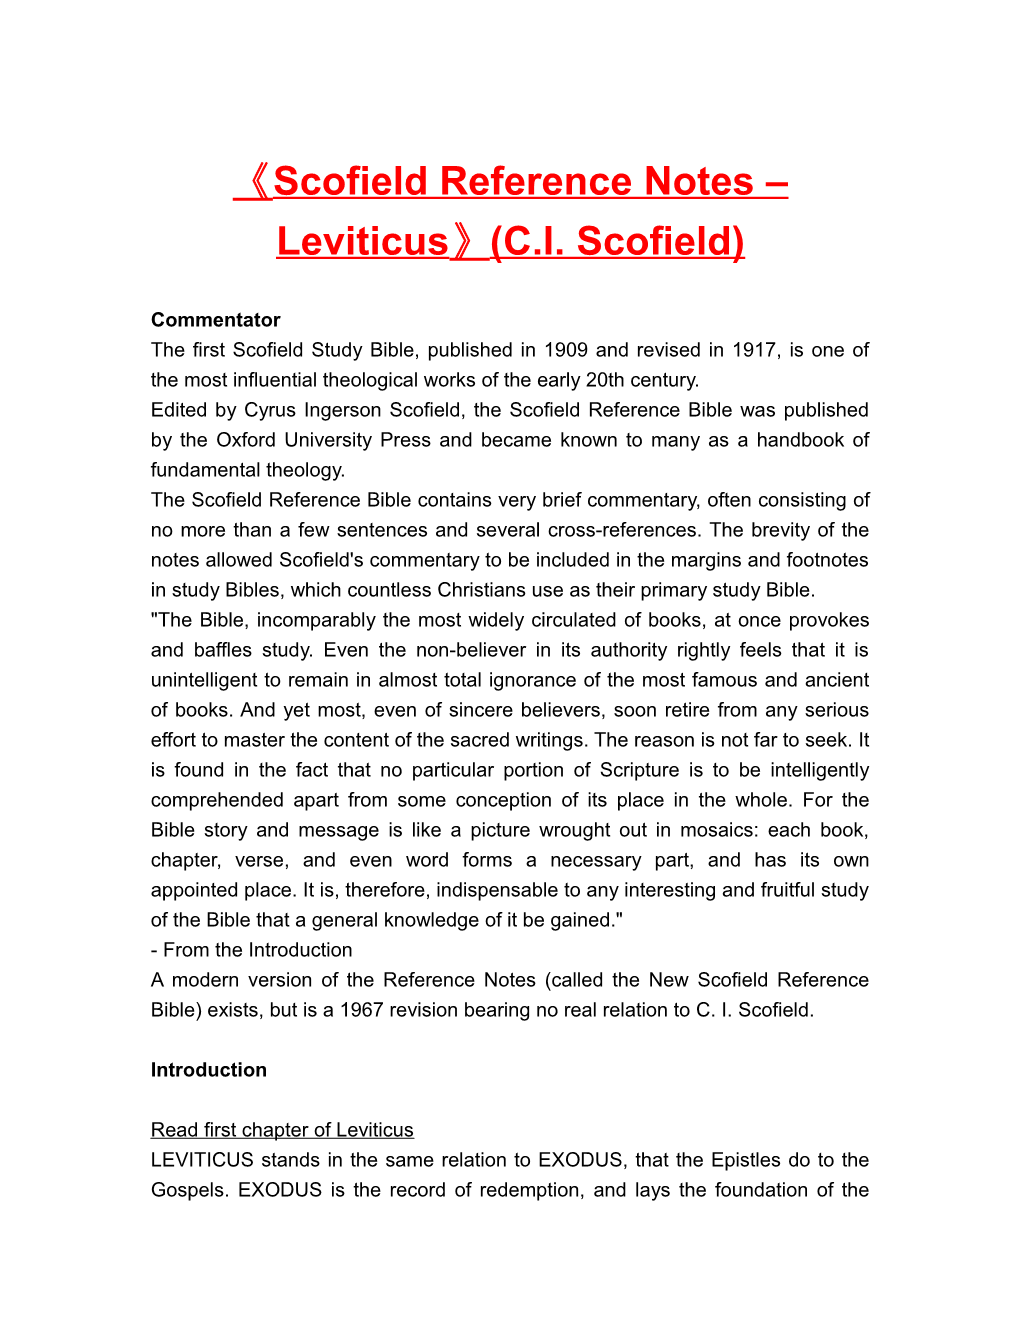 Scofield Reference Notes Leviticus (C.I. Scofield)